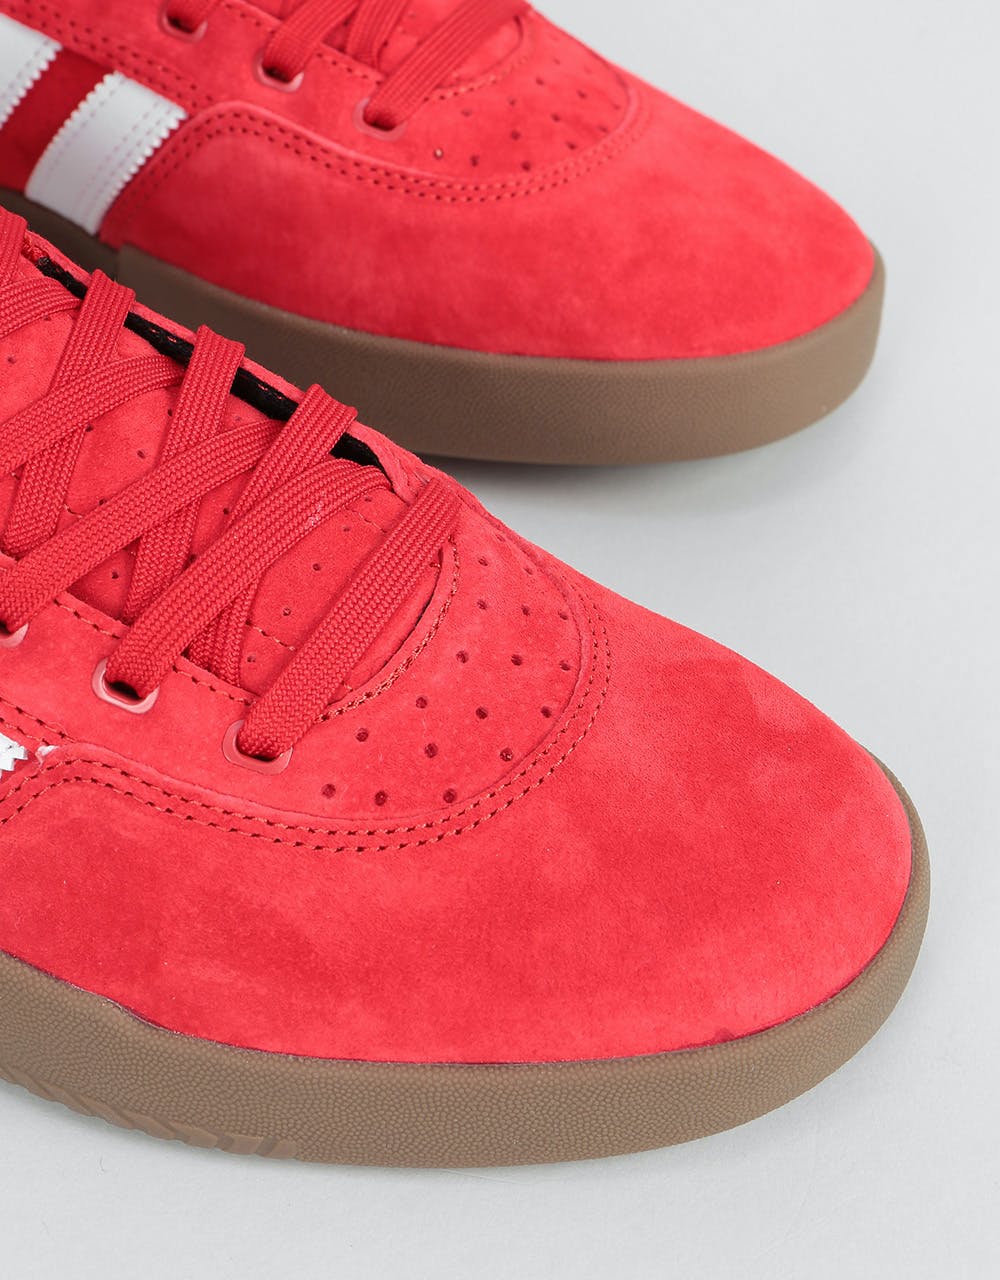 Adidas City Cup Skate Shoes - Scarlet/White/Gum